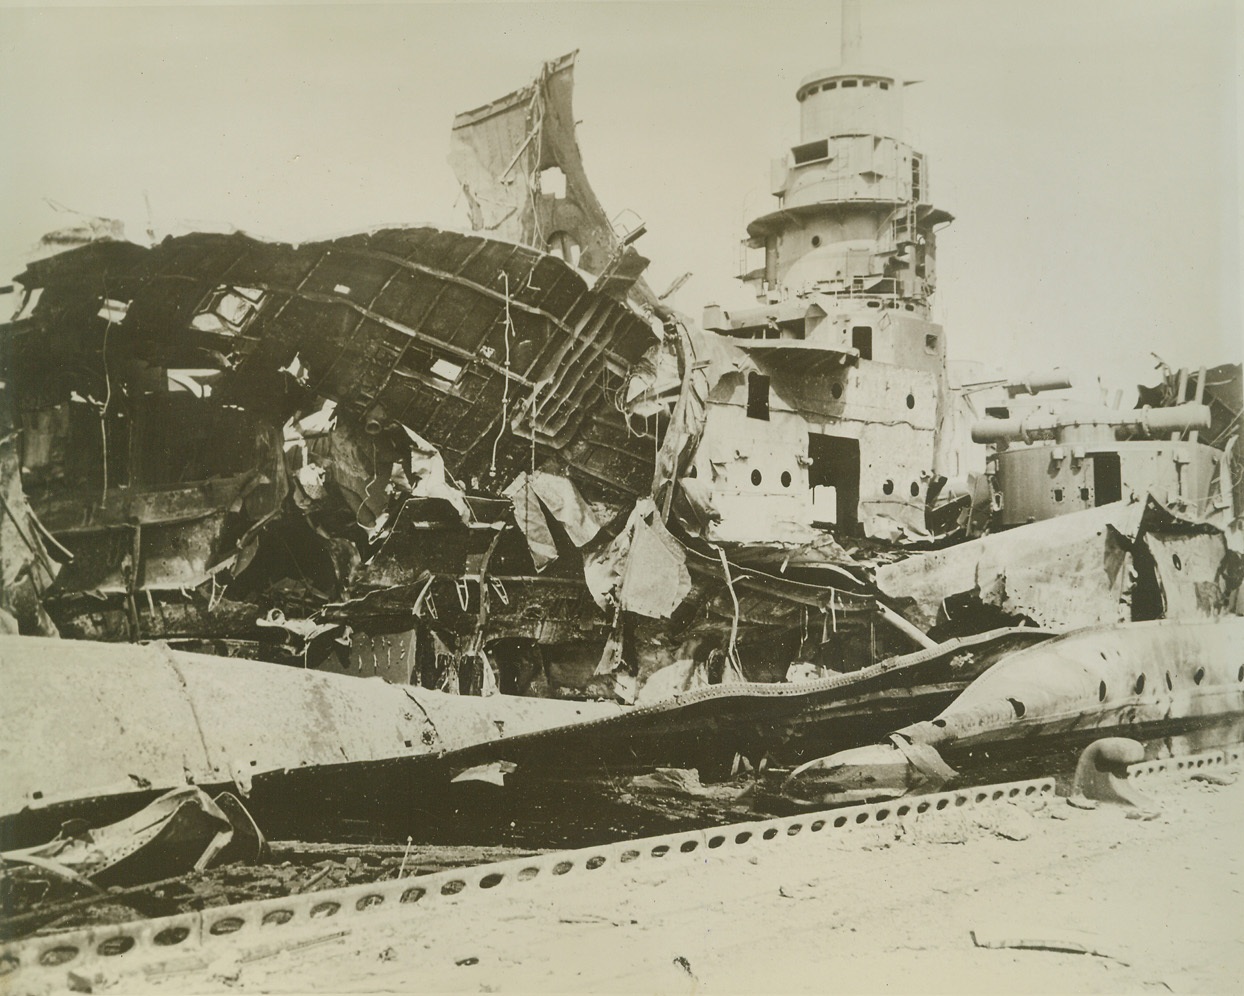 Battleship Dunkerque Blasted, 9/15/1944. France – Twisted steel and wreckage are all that remain of the battleship Dunkerque after being blasted by B-17 Flying Forts during a recent raid on the French harbor at Toulon. Credit (USAAF Photo from ACME);